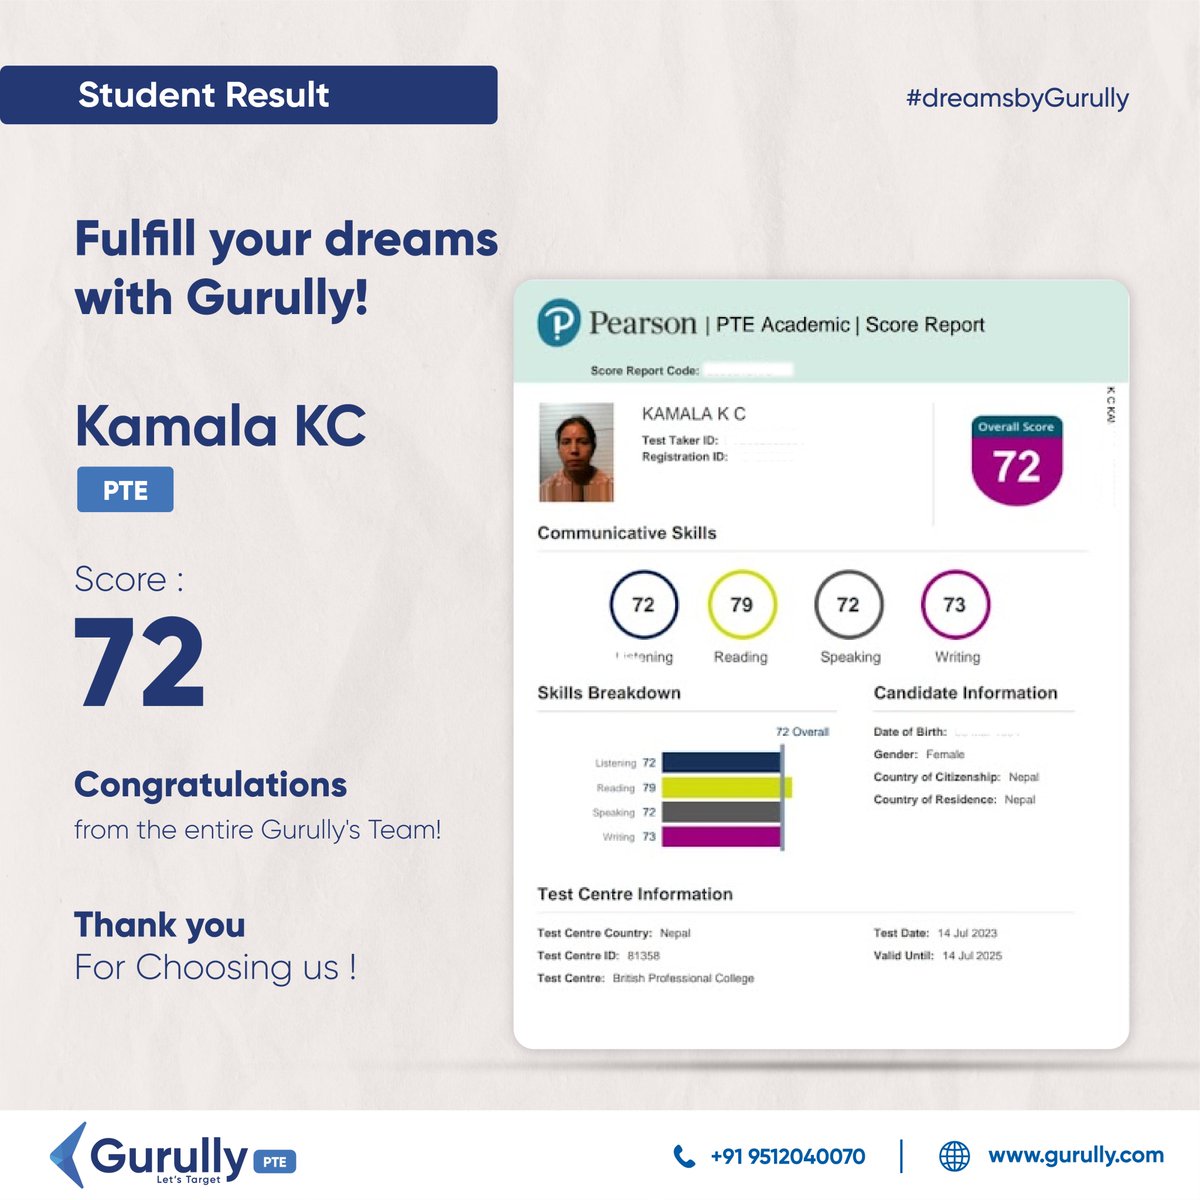 🎯Congratulations to Kamala on achieving an overall 72 score in PTE on the first attempt.🎉🎉🎯
Join Gurully.com and start practicing now to get your desired scores too.
#dreamsbygurully #StudentSucess #ptescore #ptescorecard #pteresult  #PTEDesiredScore #Gurully